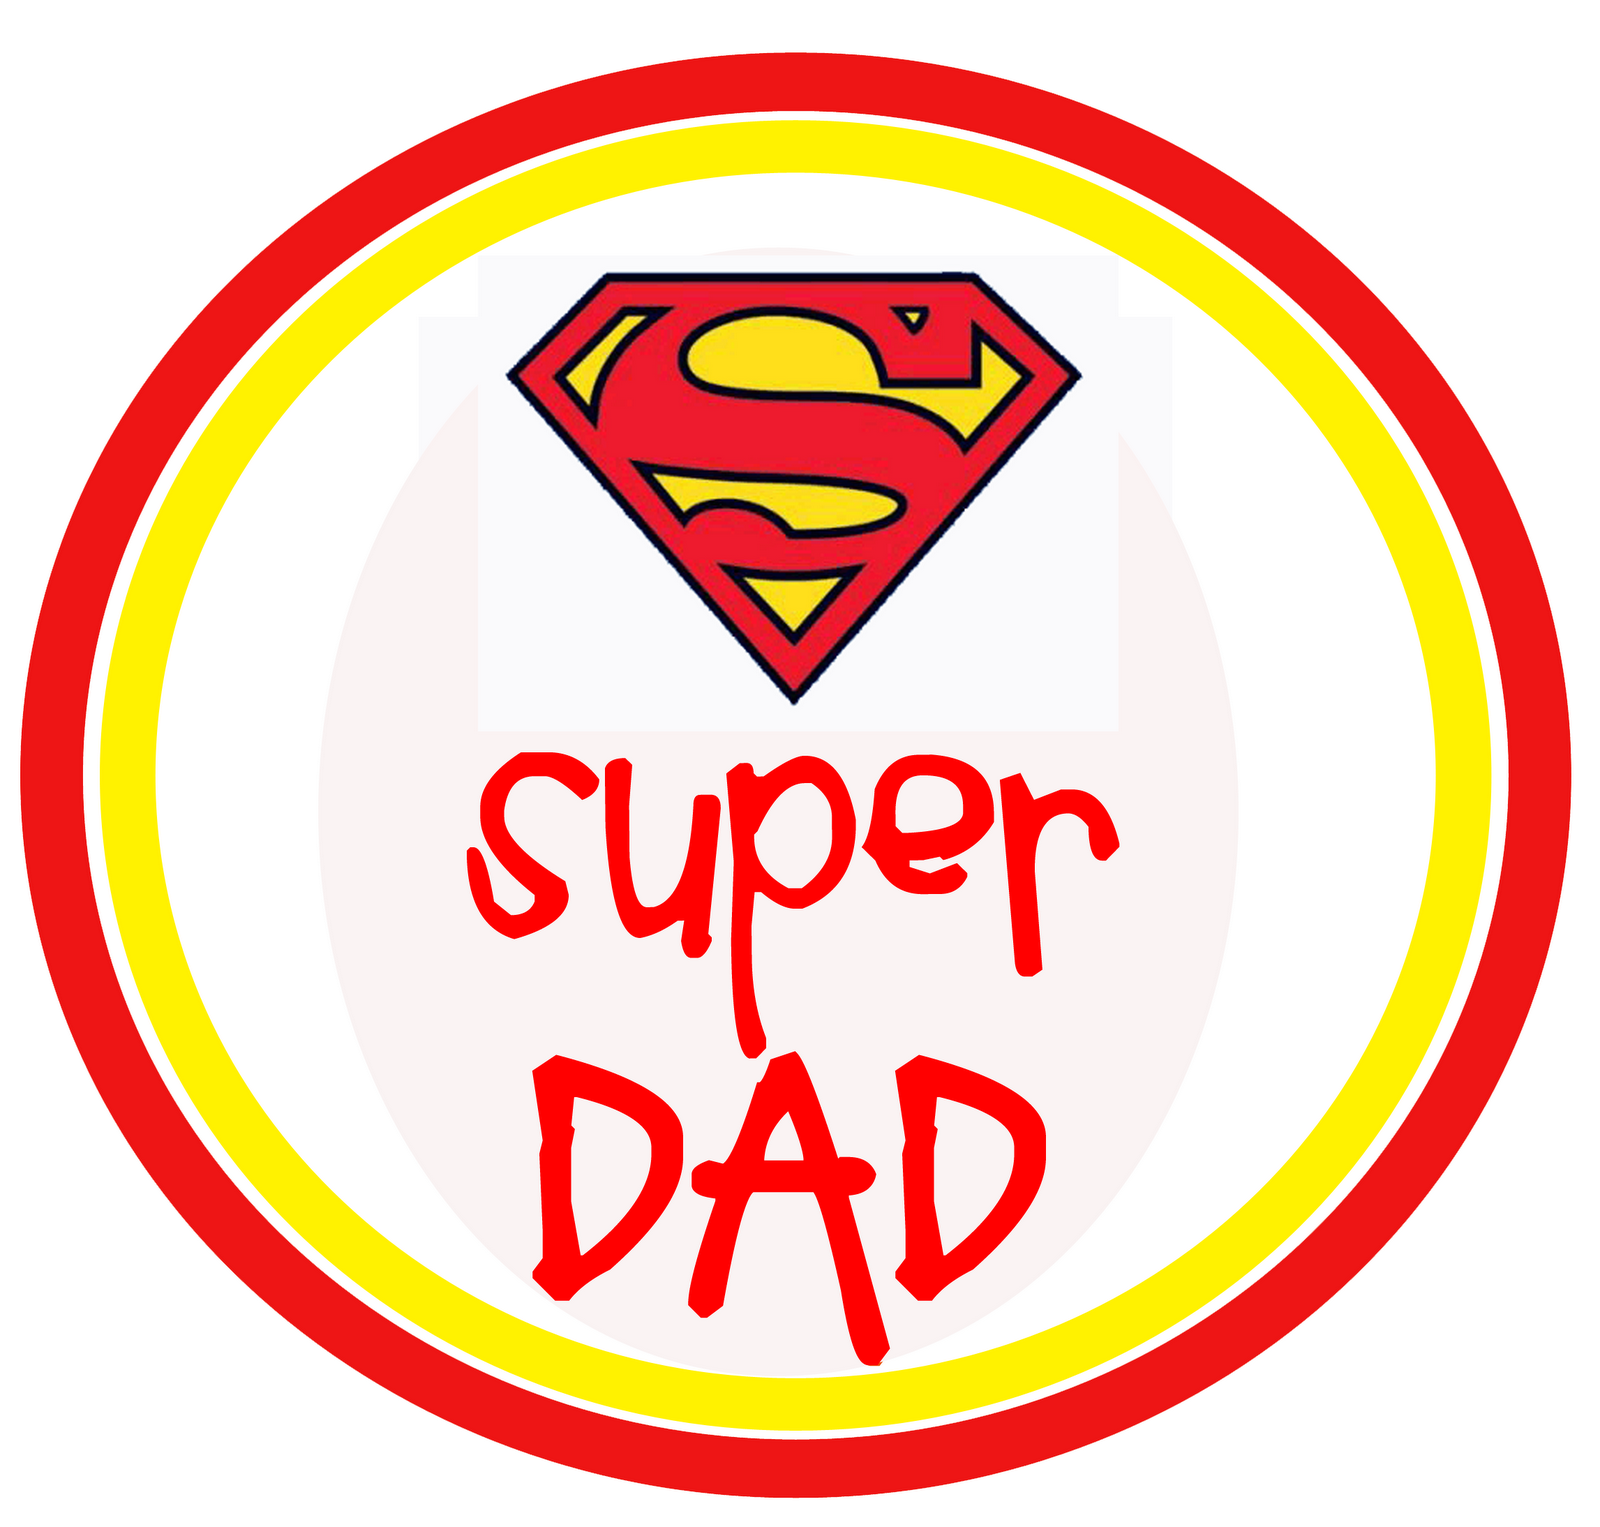 fathers-day-free-clip-art-father-day-clipart-image-16379